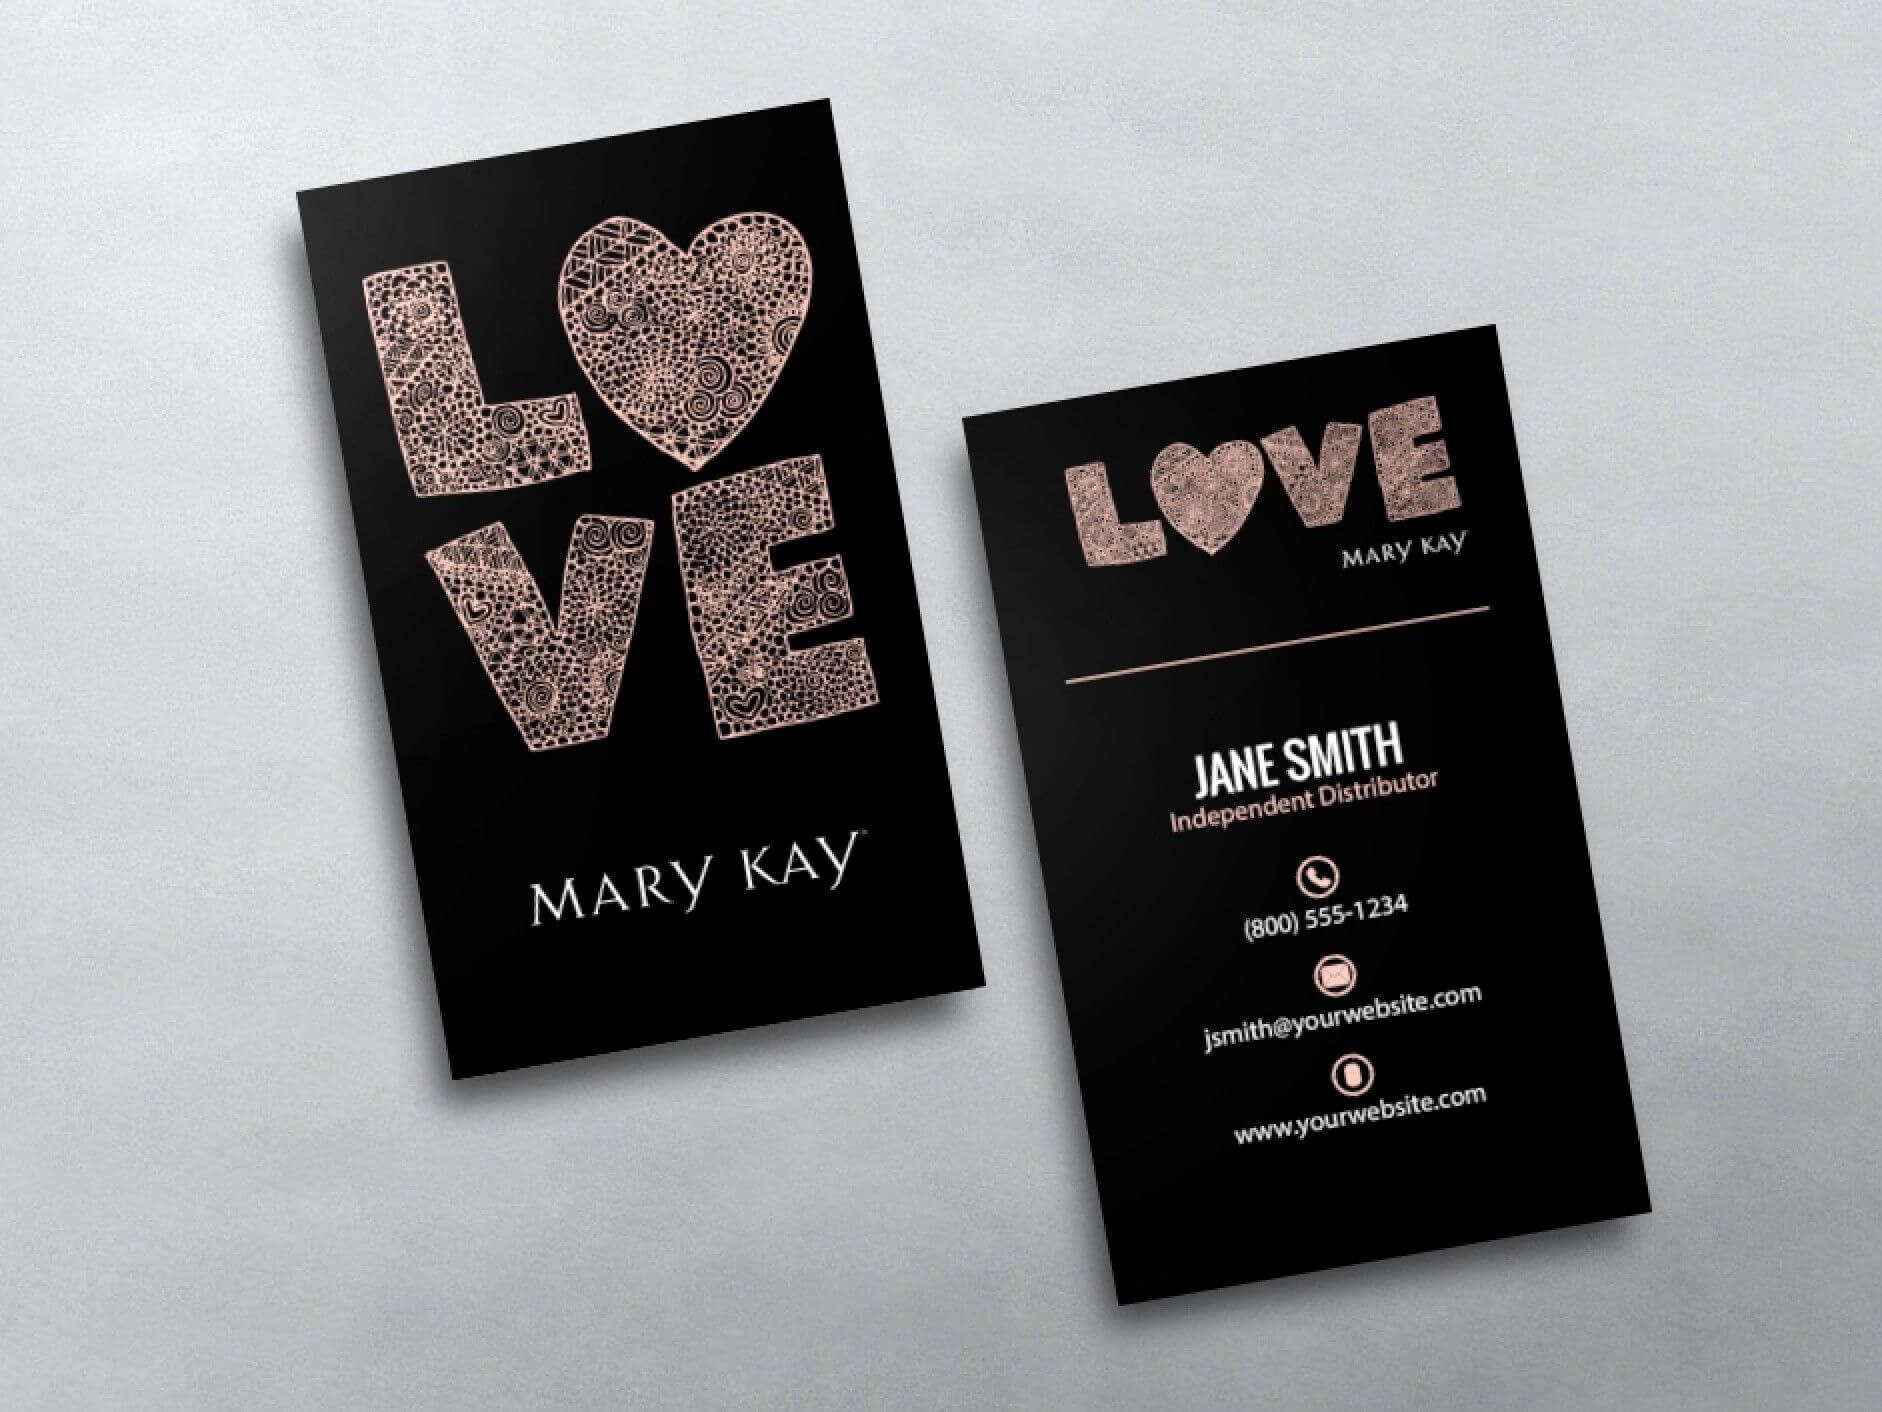 Mary Kay Business Cards In 2019 | Mary Kay, Business Cards With Mary Kay Business Cards Templates Free